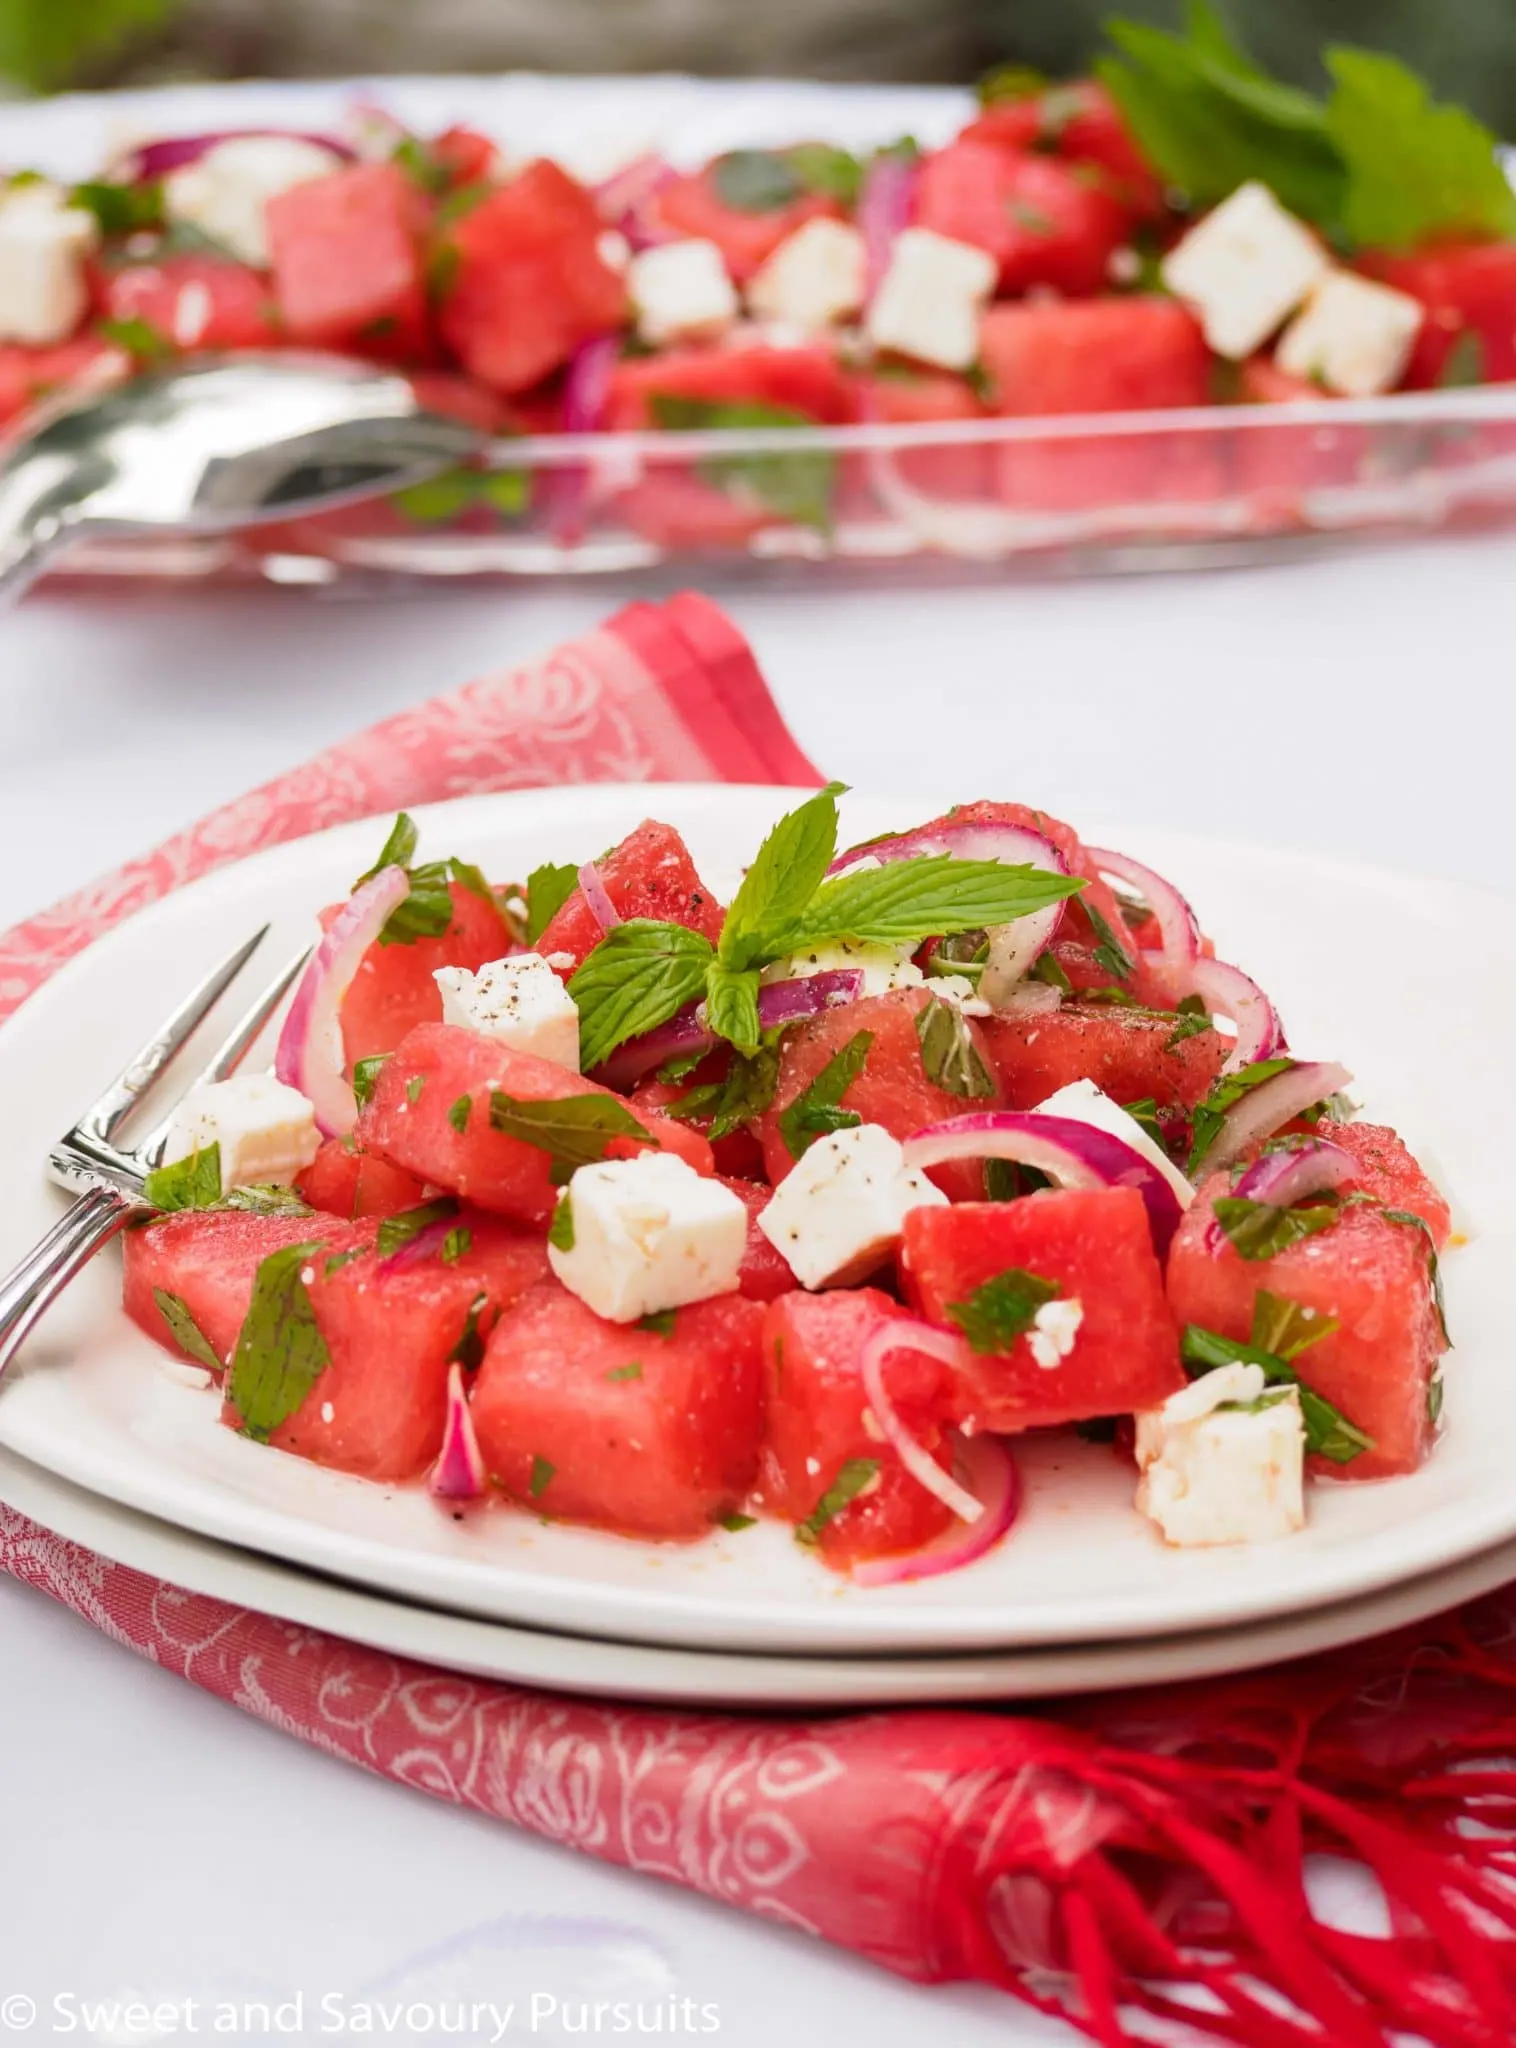 Plate of Watermelon Salad with fresh mint.